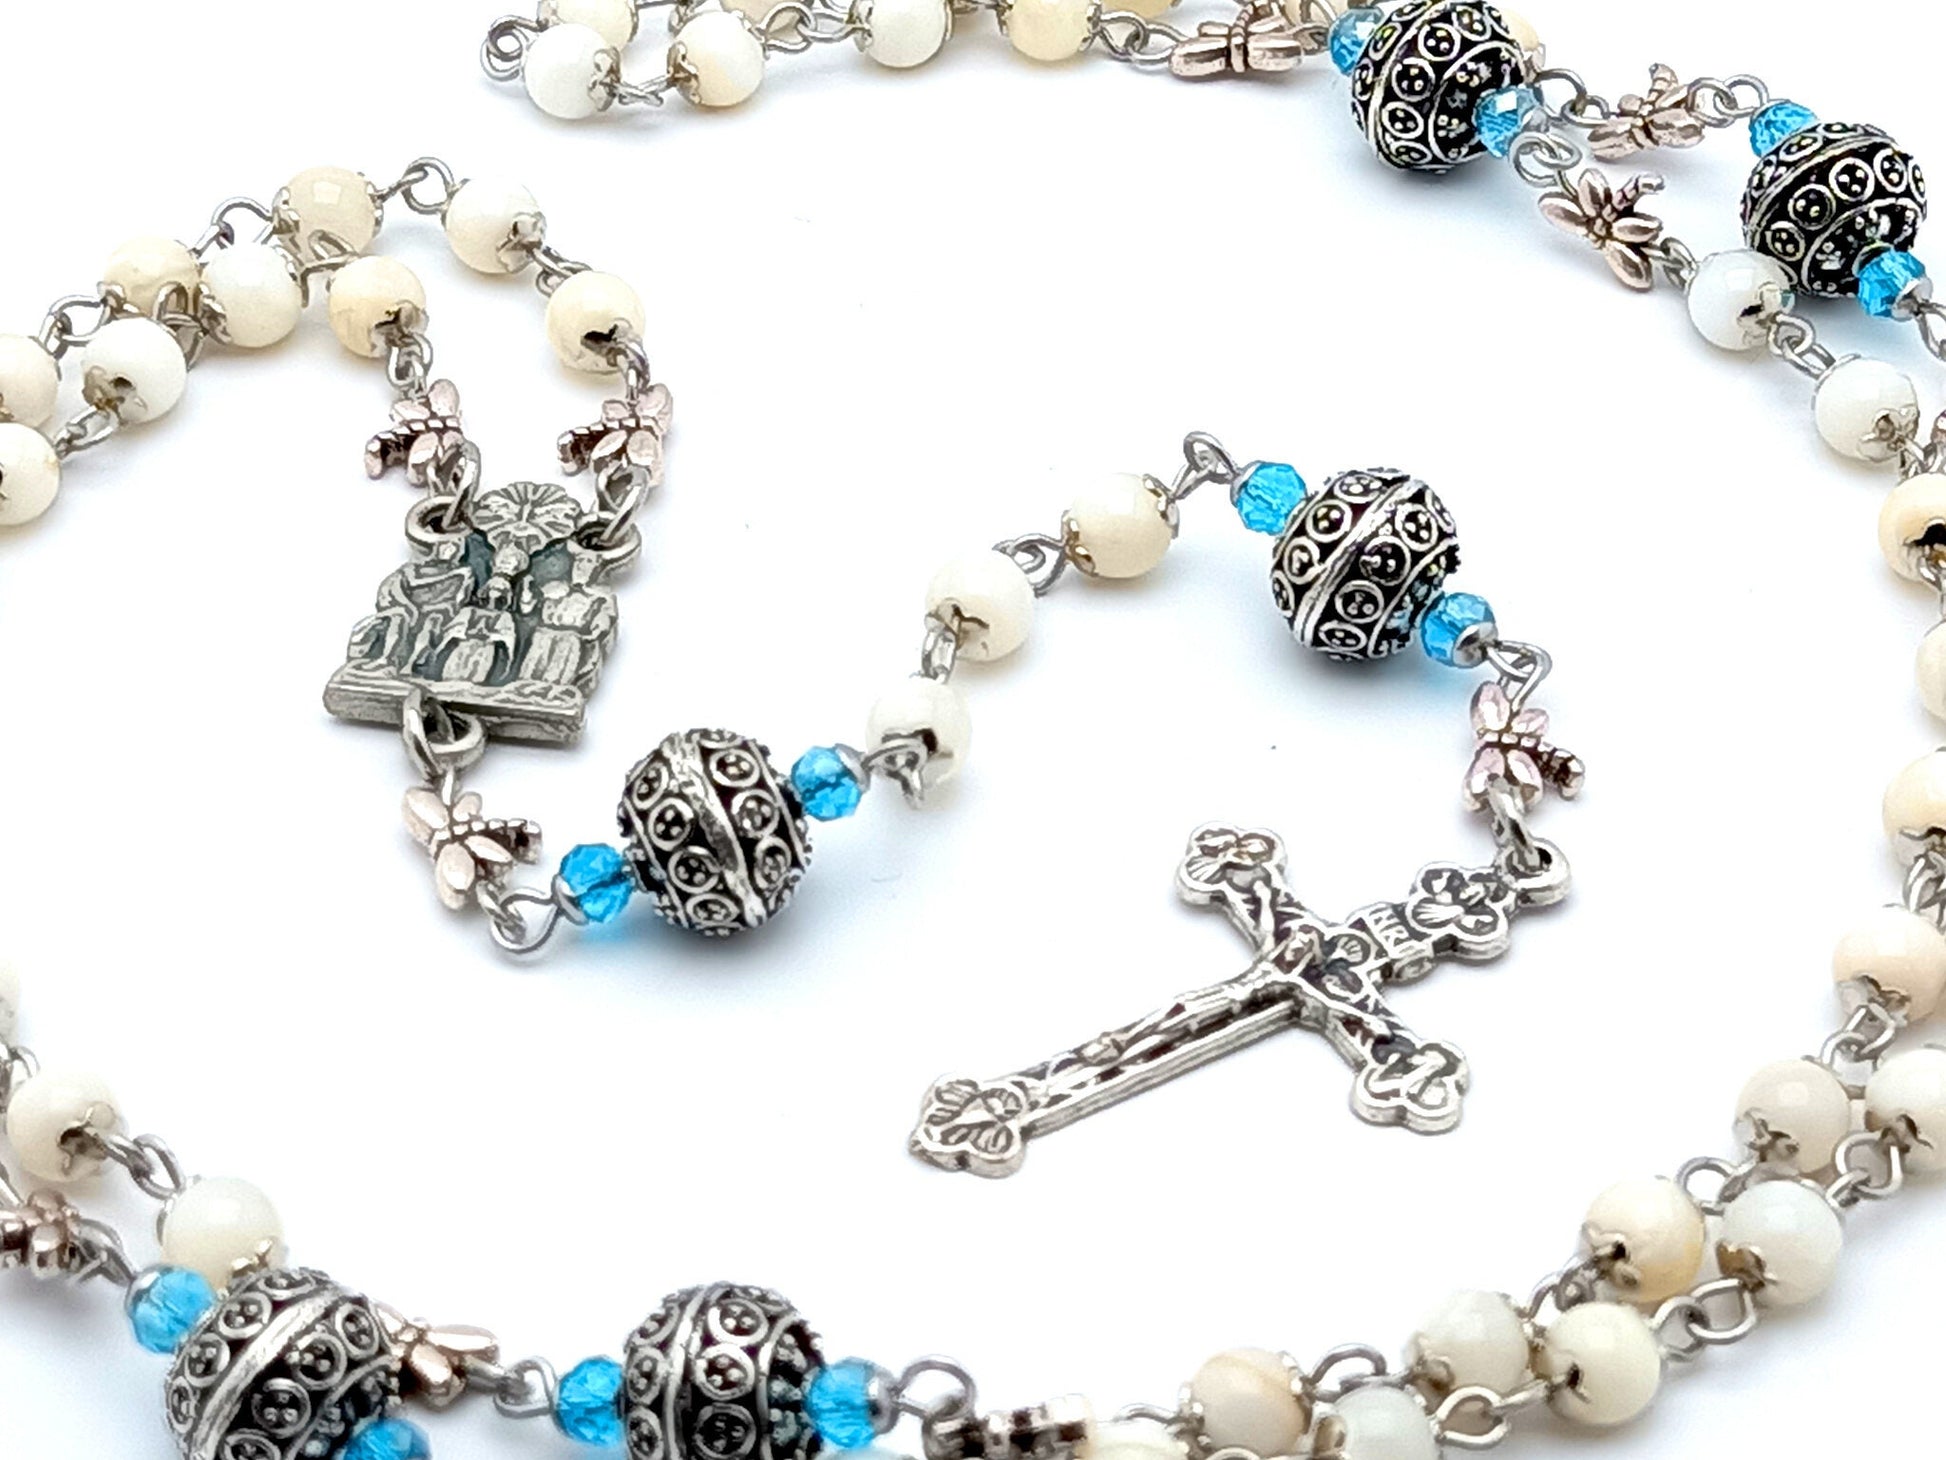 The coronation of the Blessed Virgin Mary unique rosary beads with mother of pearl and silver beads, Holy Trinity crucifix and silver centre medal.